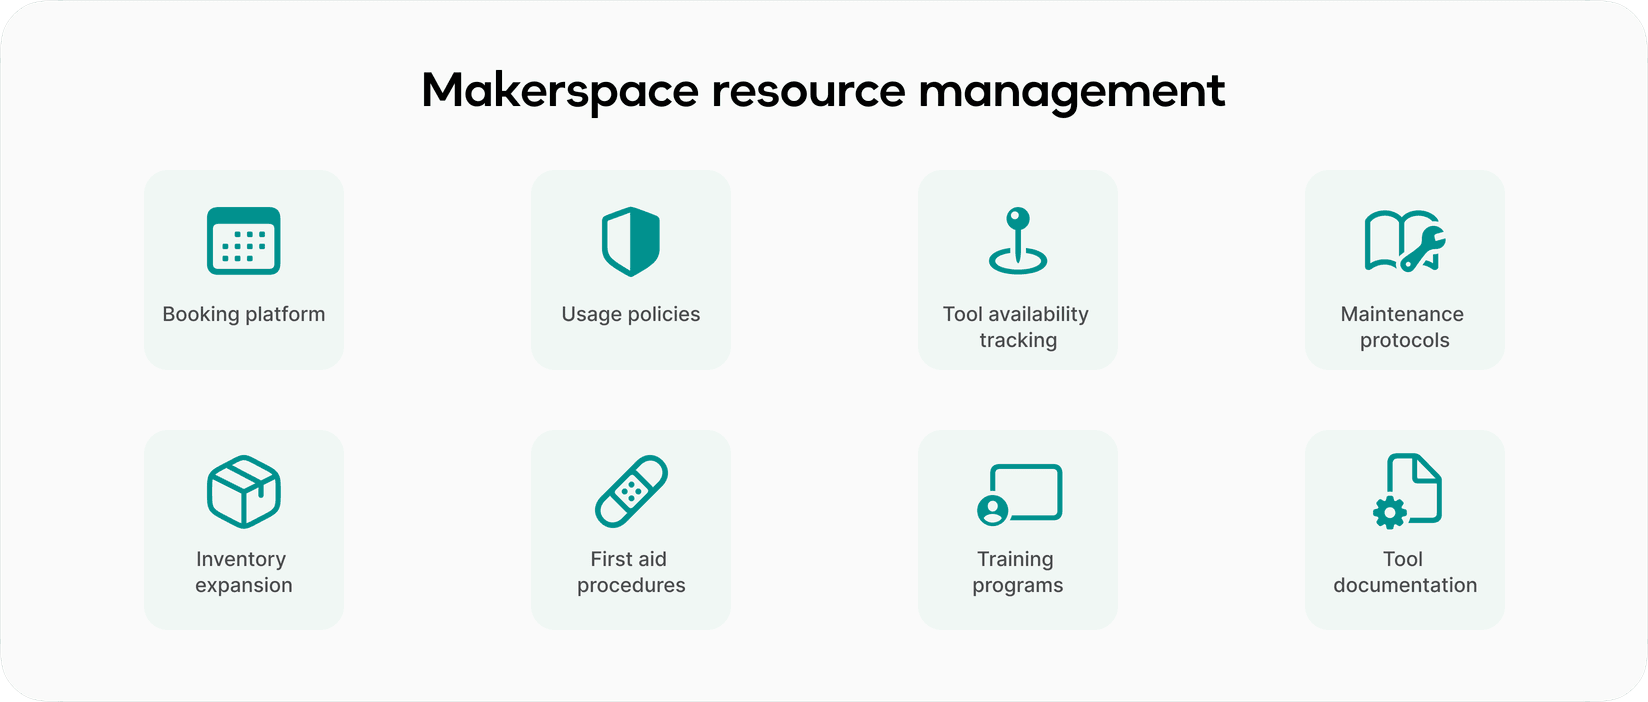 How to manage resources at a makerspace